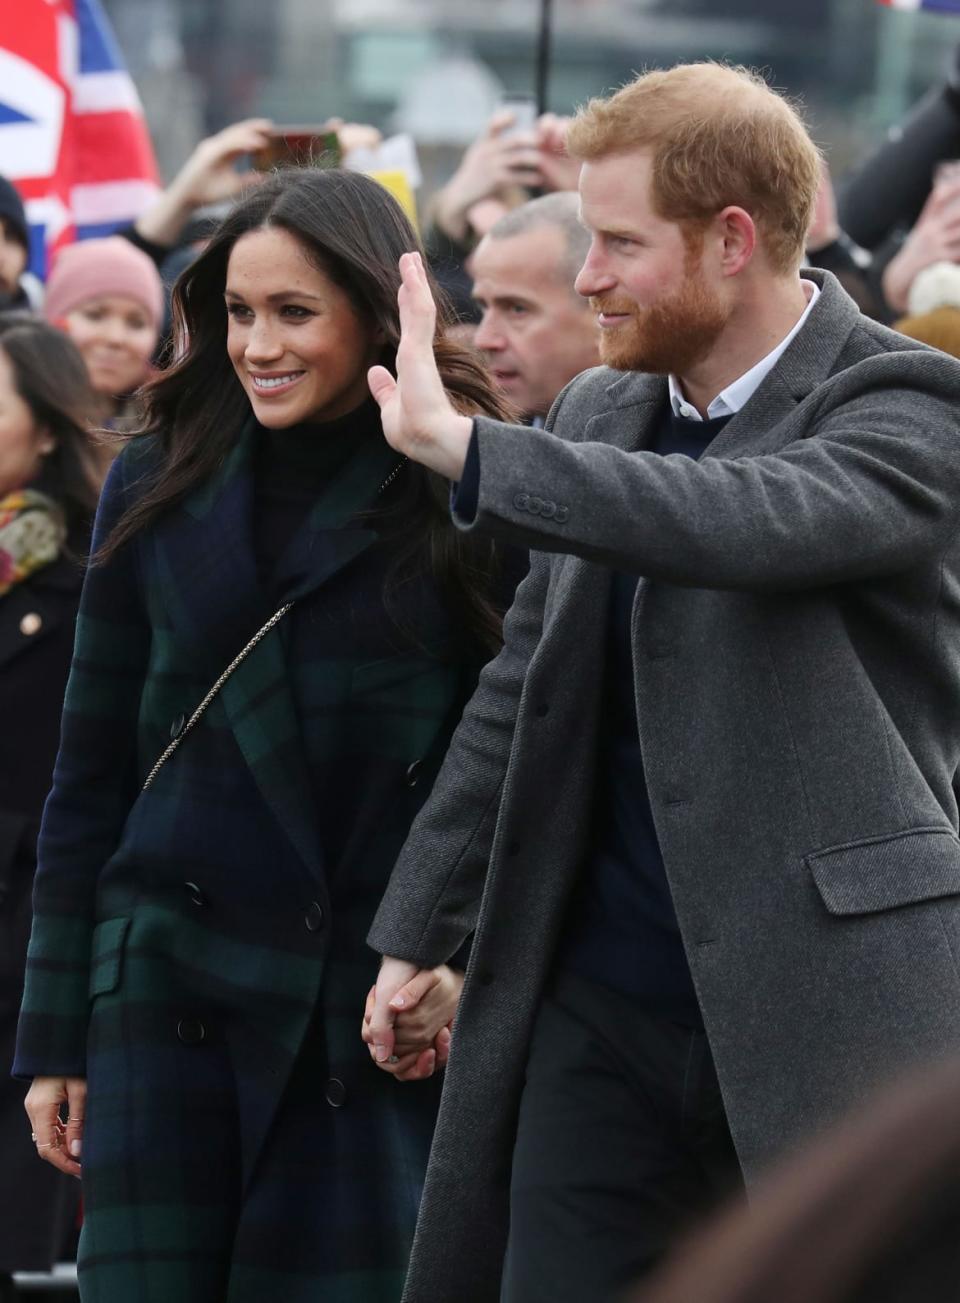 <div class="inline-image__caption"><p>Meghan Markle and Britain's Prince Harry, meet members of the public during a walkabout on the esplanade at Edinburgh Castle, Britain, February 13, 2018.</p></div> <div class="inline-image__credit">REUTERS/Andrew Milligan/Pool</div>